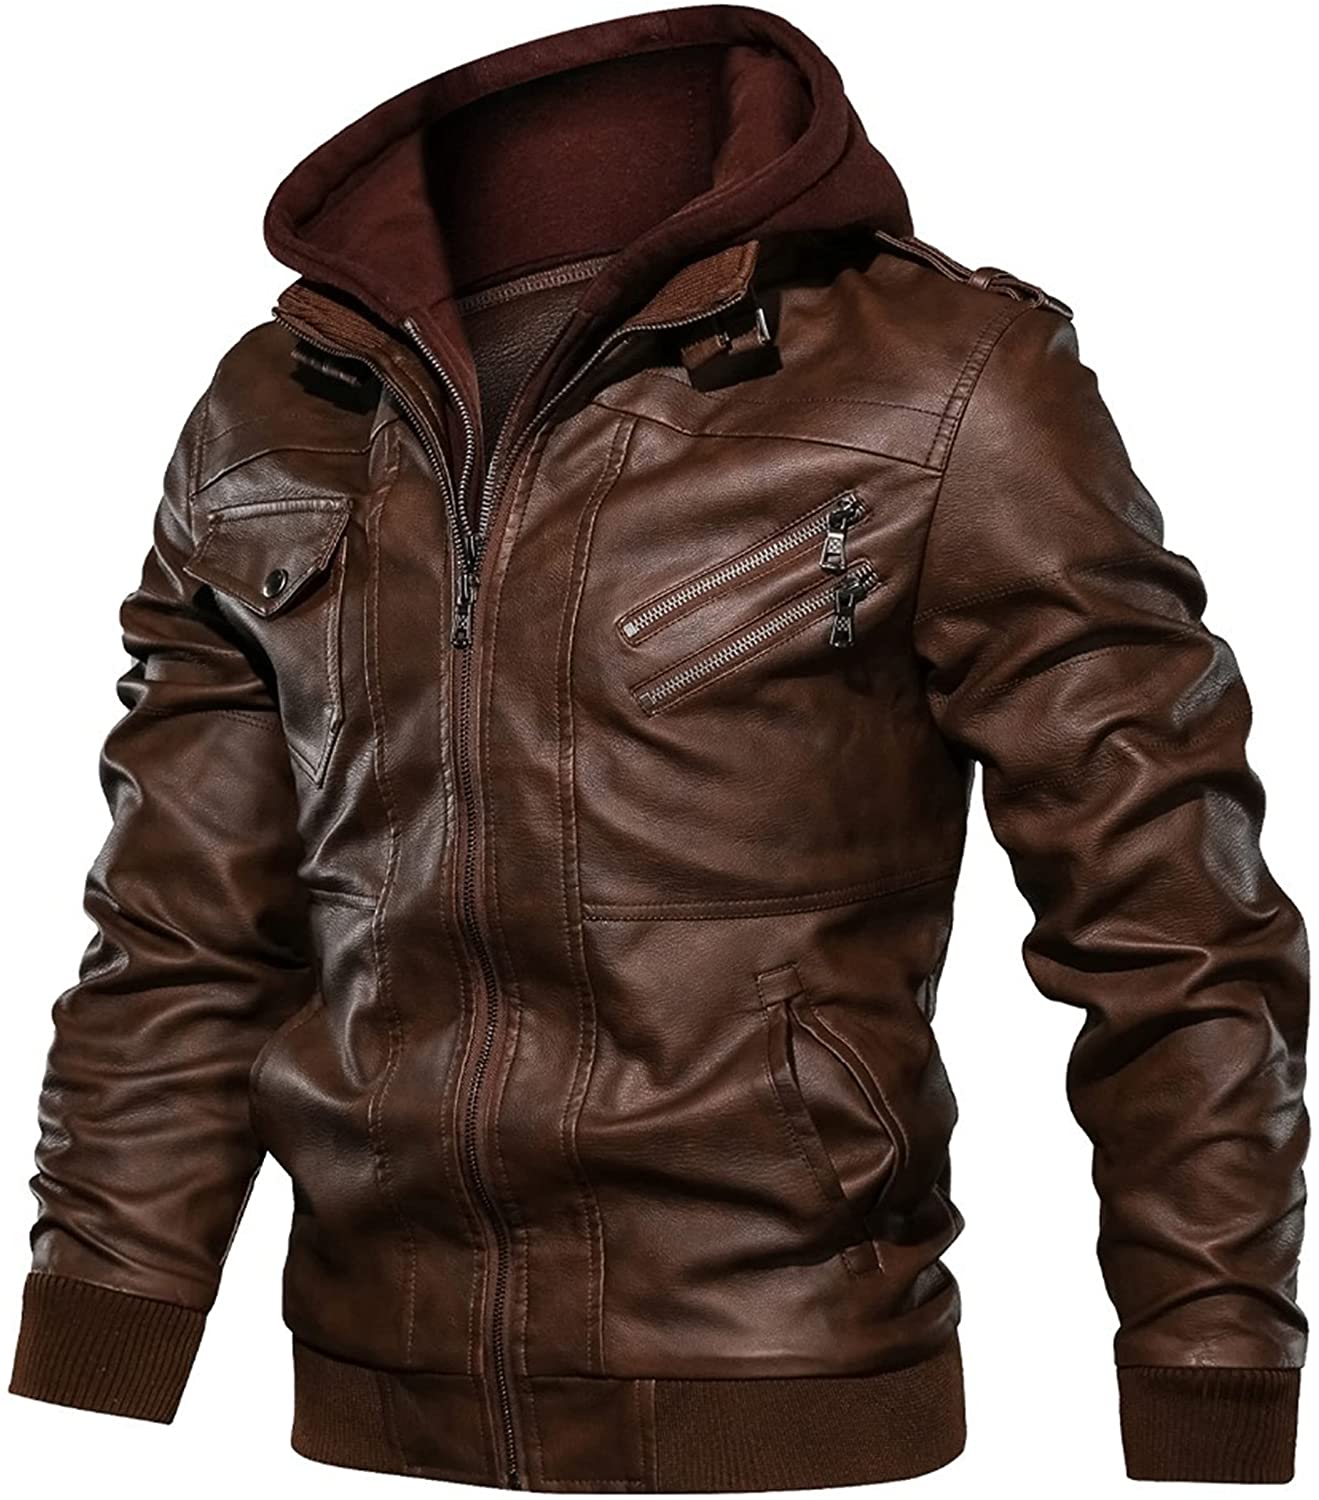 Springrain Mens Casual Stand Collar Slim PU Leather Sleeve Bomber Jacket